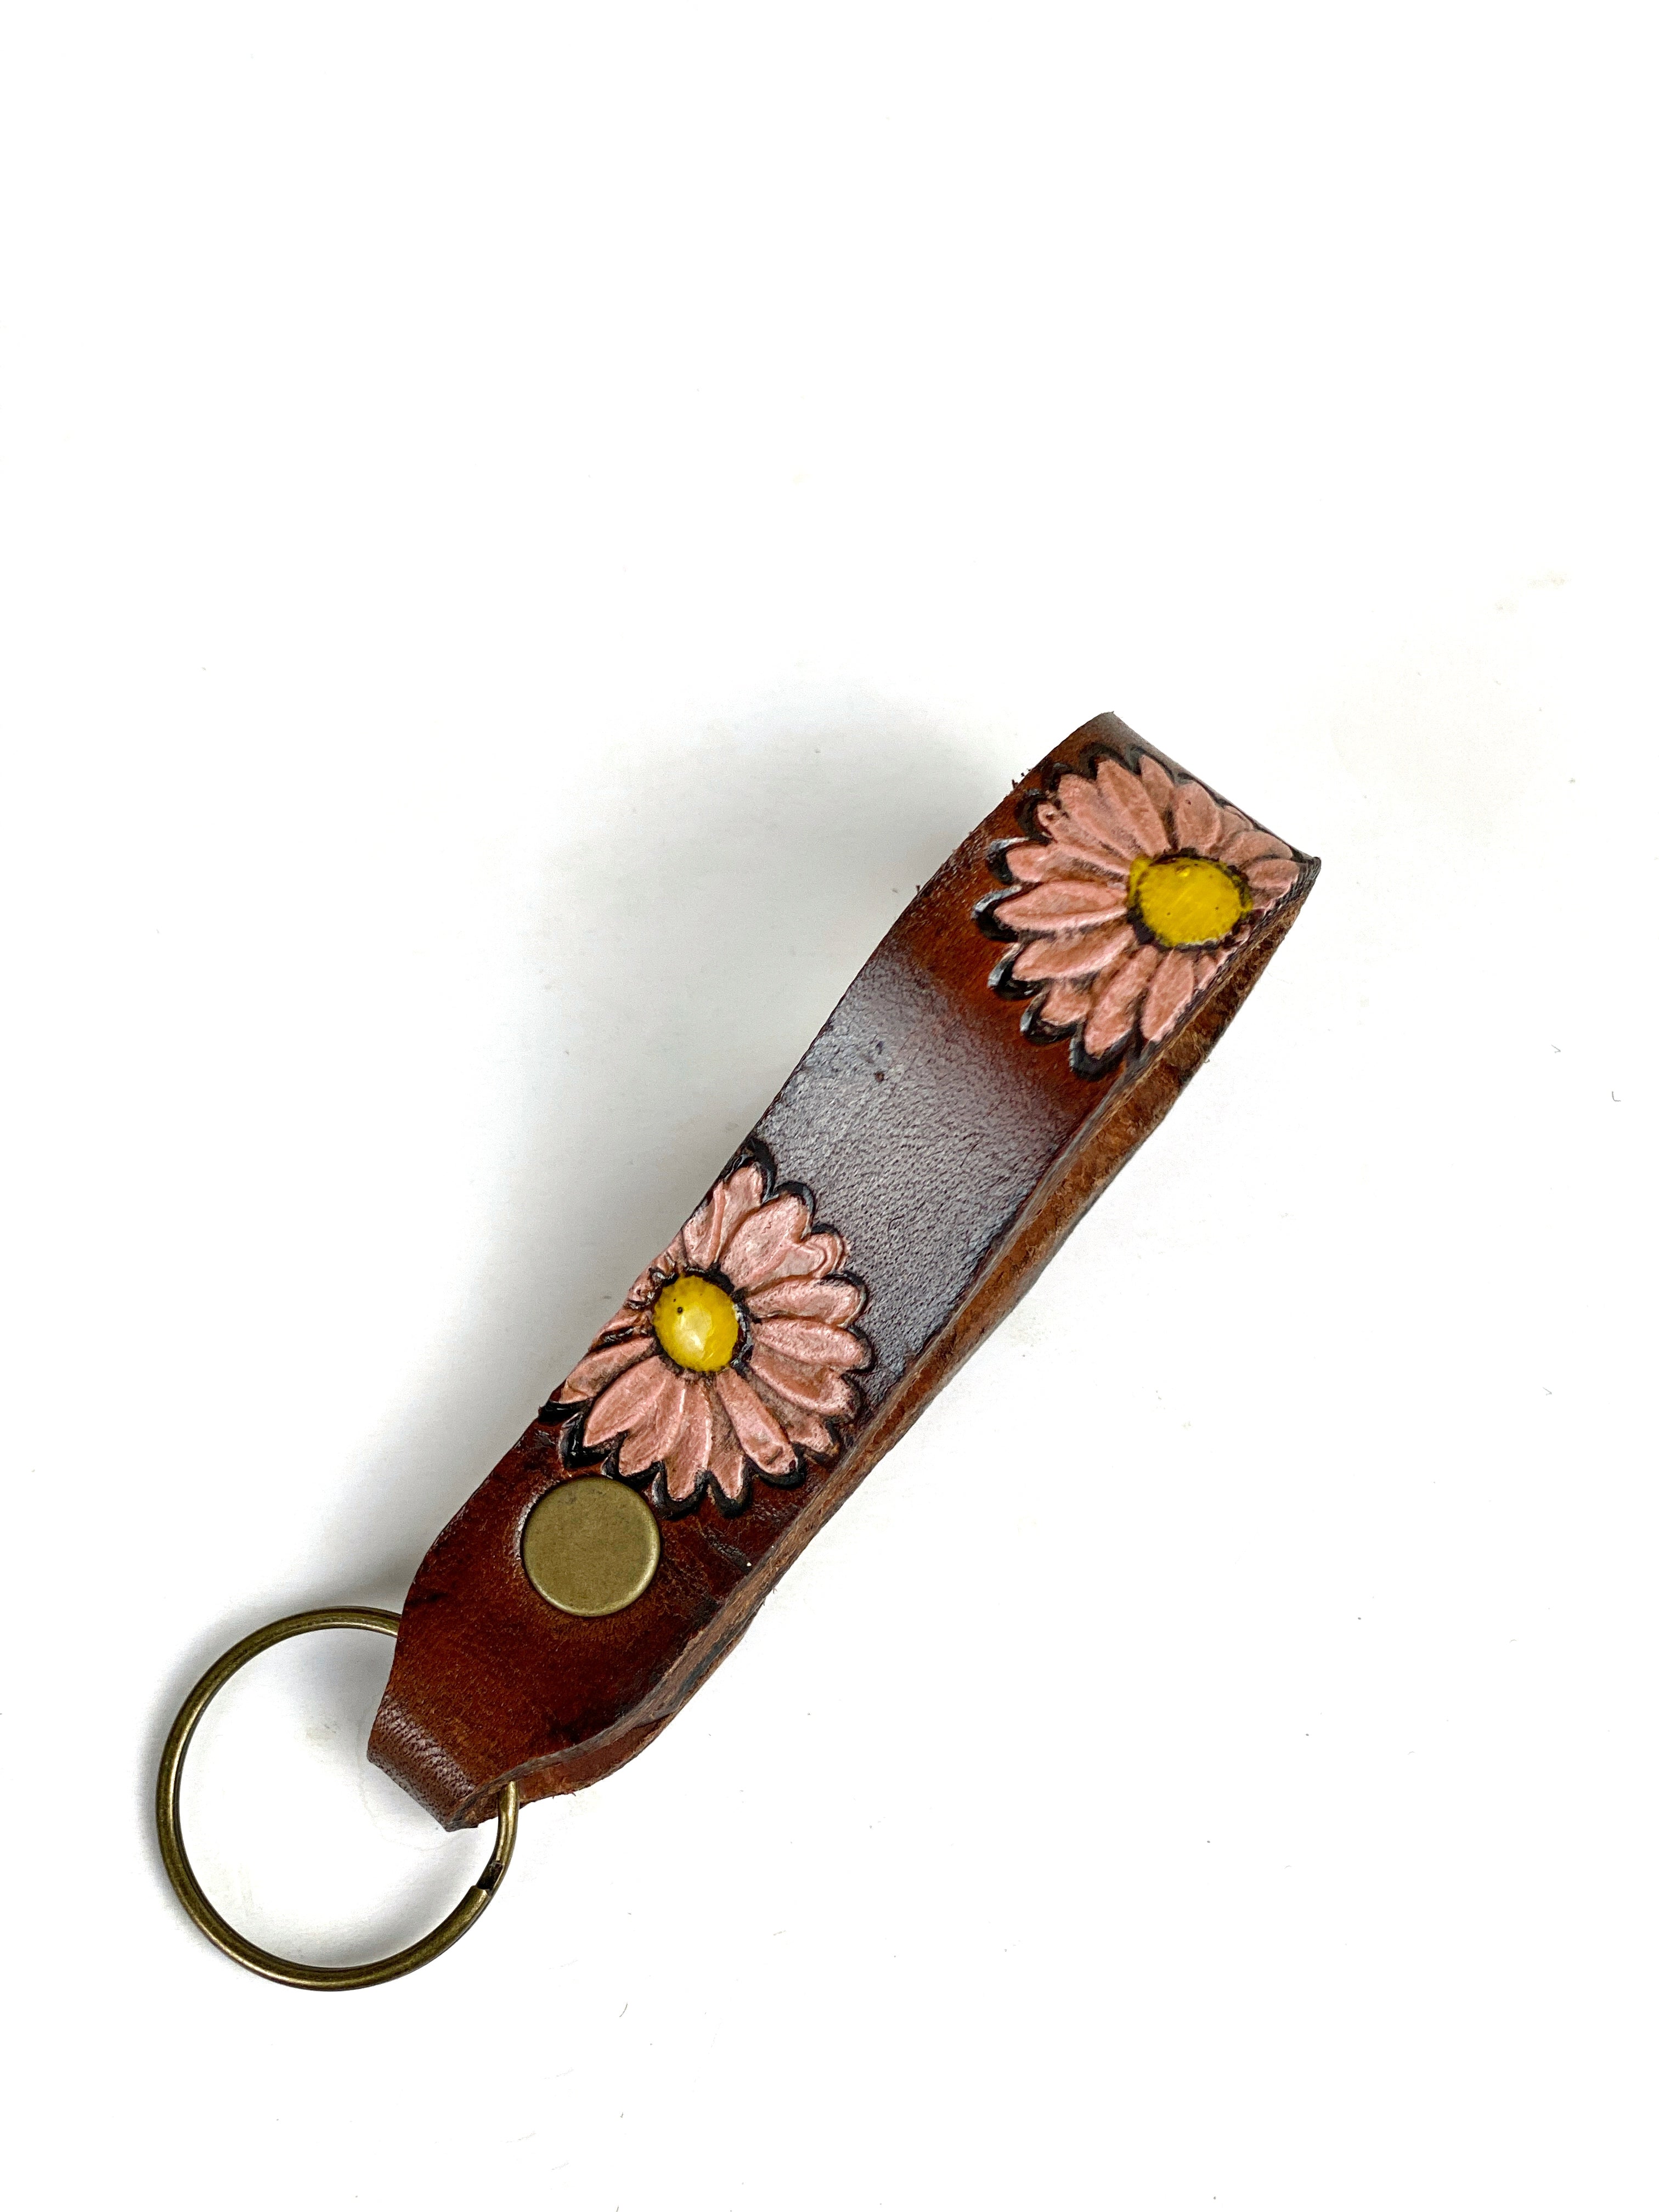 Wildflower Leather Key Fob, Hand Stamped Sunflower Key Fob, Painted Leather Daisy Flower Key Chain